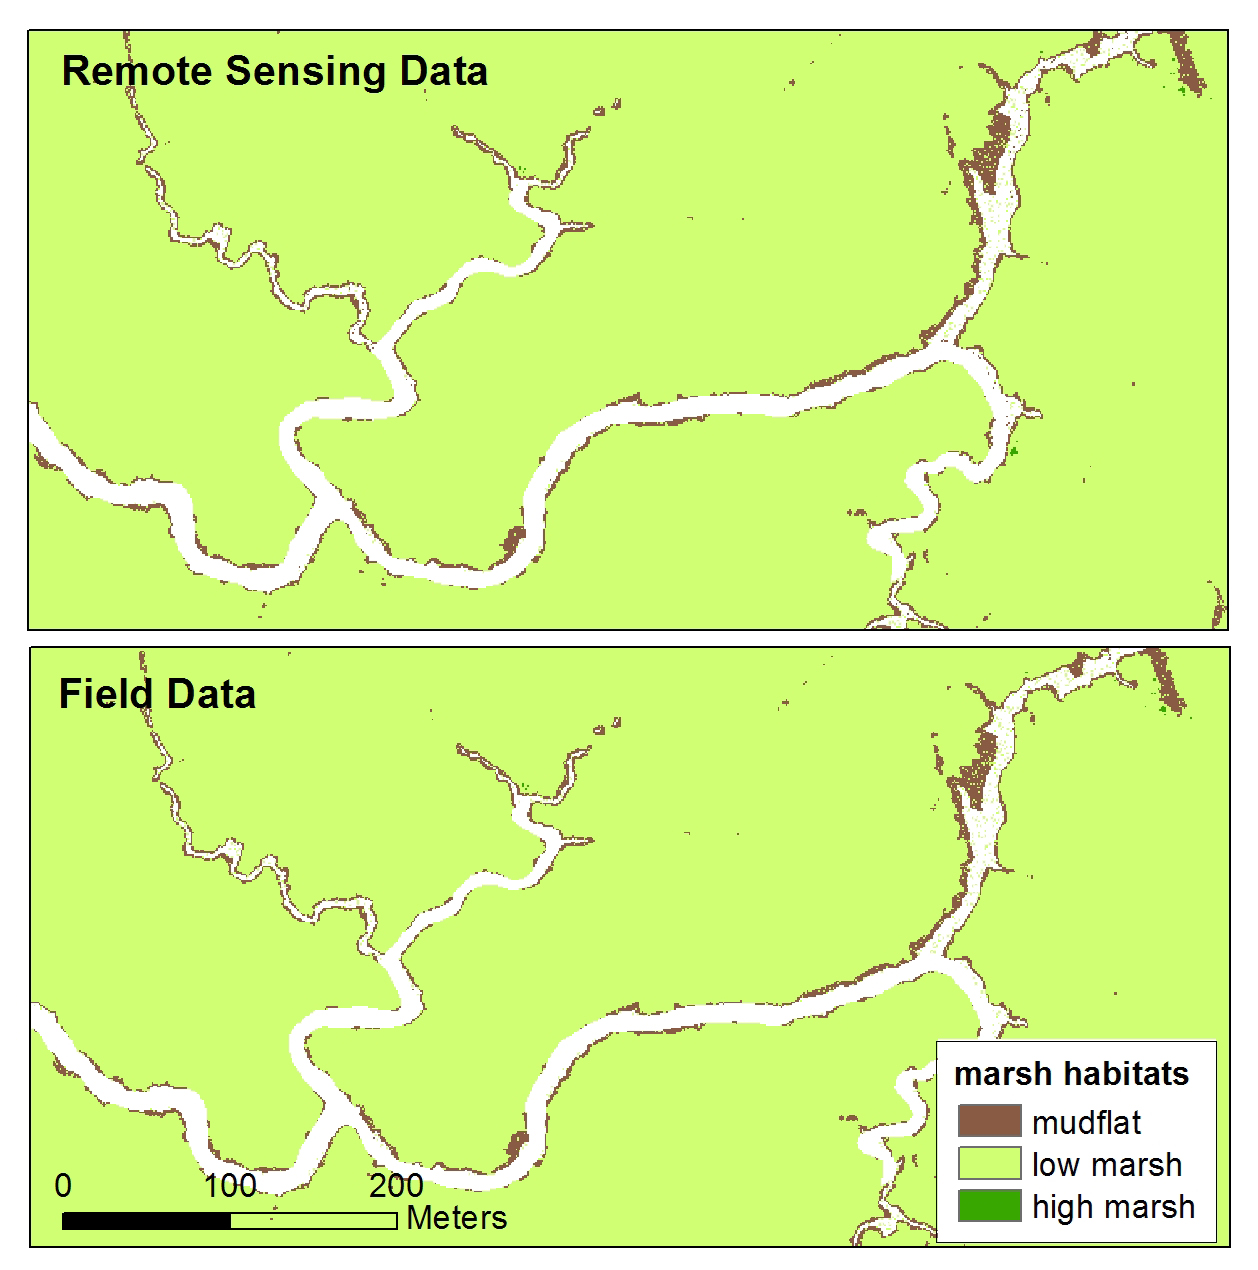 Projected vegetation community maps at year 2100 for Rush Ranch, Suisun Marsh, California, based on Marsh Equilibrium Model (MEM) outputs and a lidar digital elevation model (DEM). The top map was generated with inputs derived from Landsat 8 to MEM, and the bottom map was generated with field data inputs to MEM. Comparison of Landsat 8 and field-based MEM inputs found no significant difference in projections across 95% of the marsh plain area at 100 years, with both projections illustrating a subtle “sinking” of the marsh. North is oriented toward the top of the image.